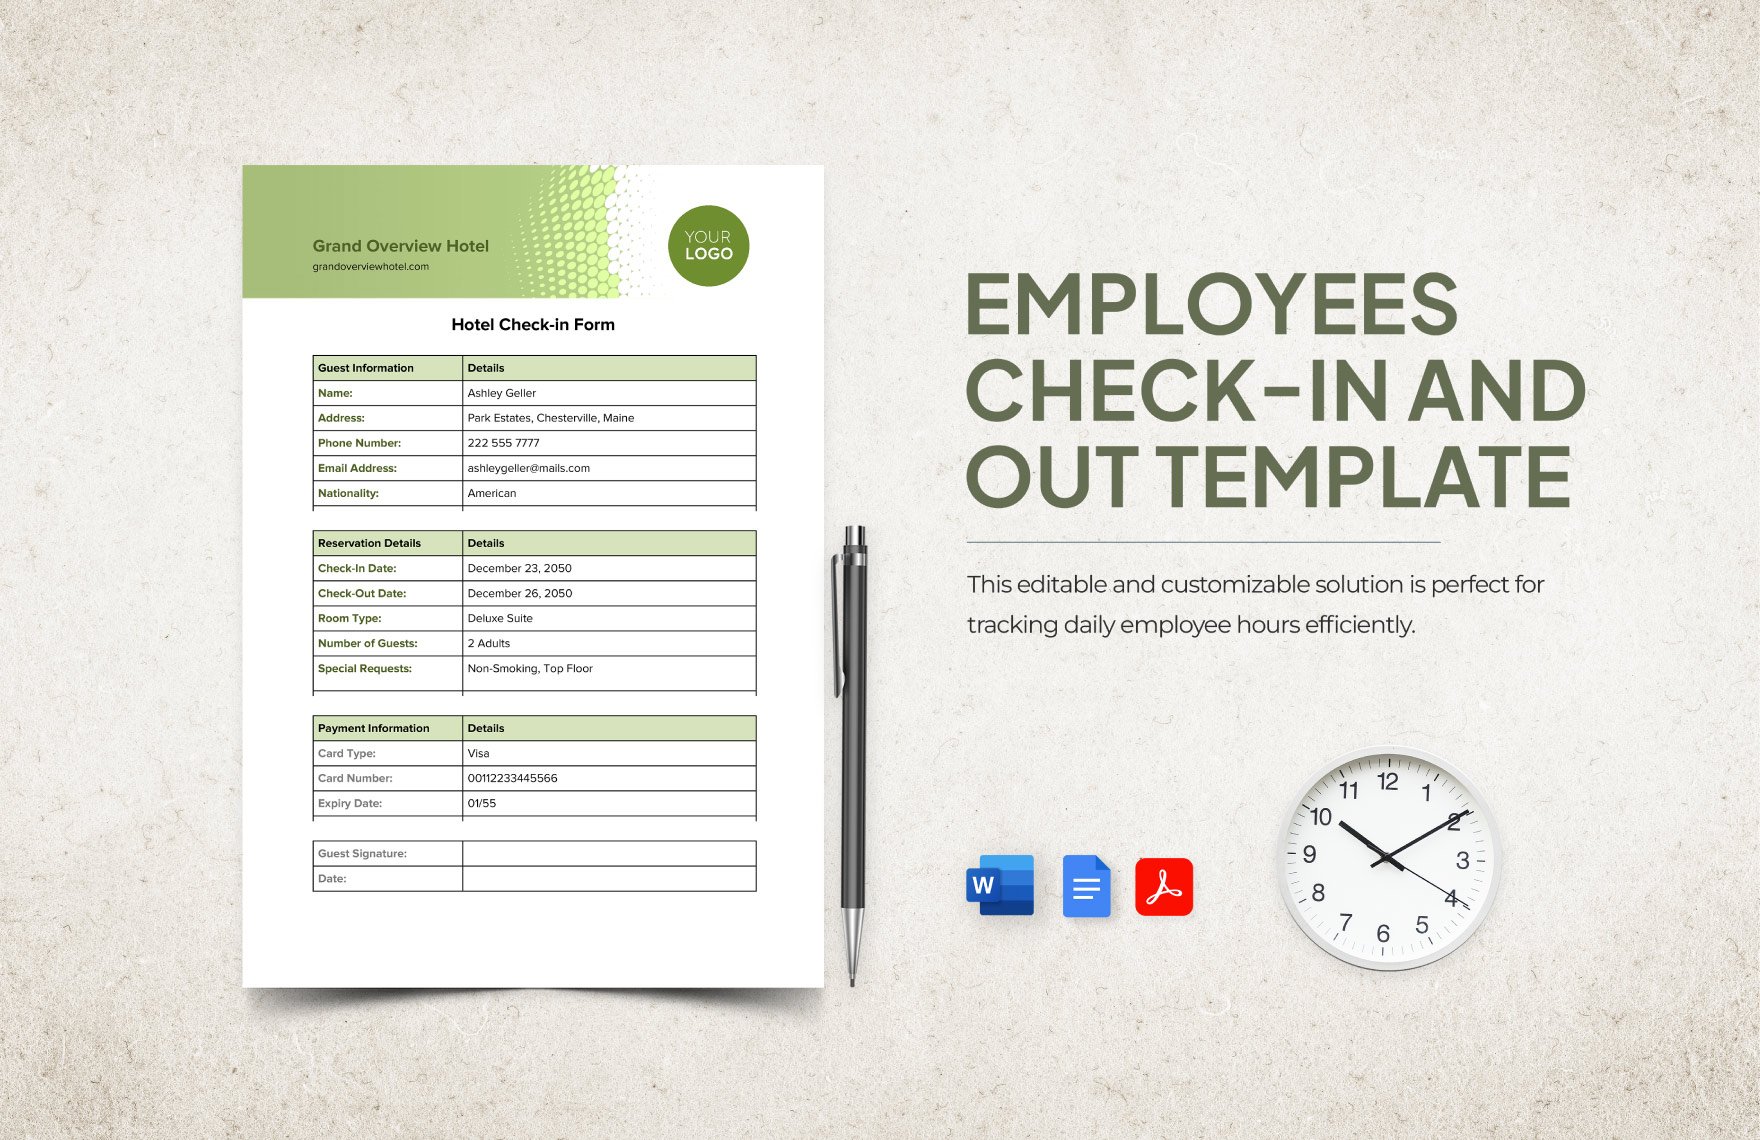 Employees Check-in and Out Template